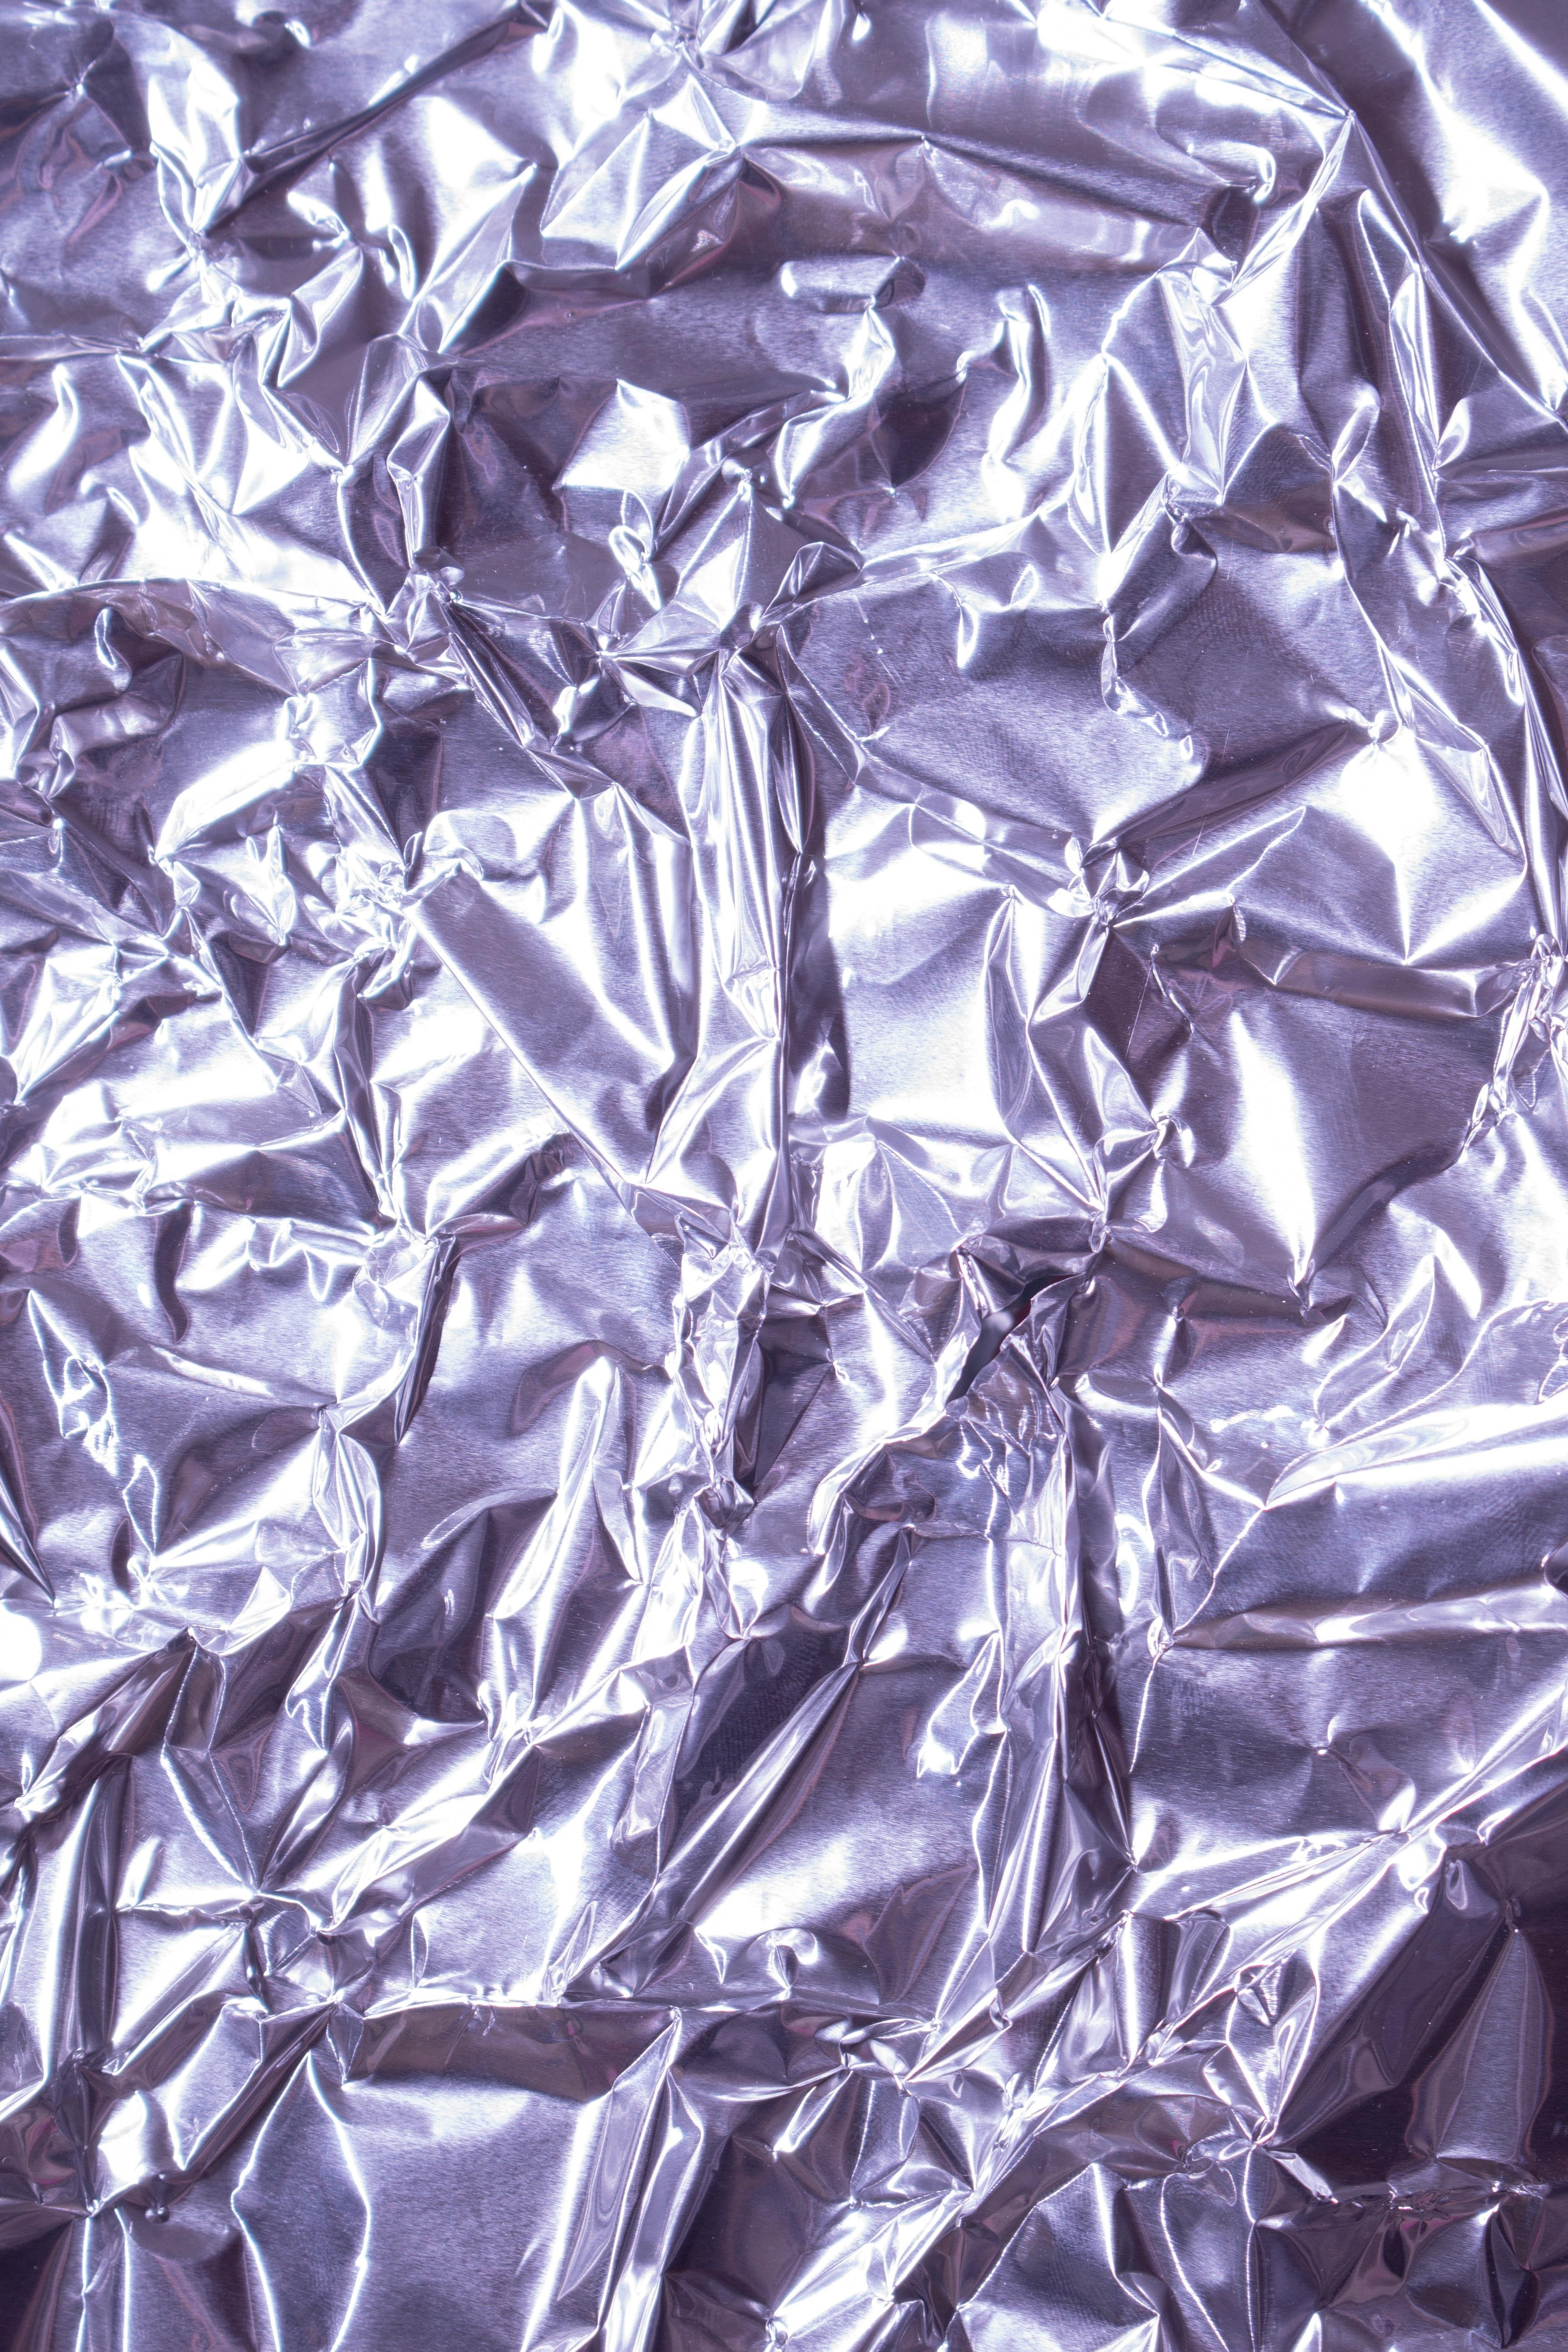  Can Airport Scanners See Through Aluminum Foil 